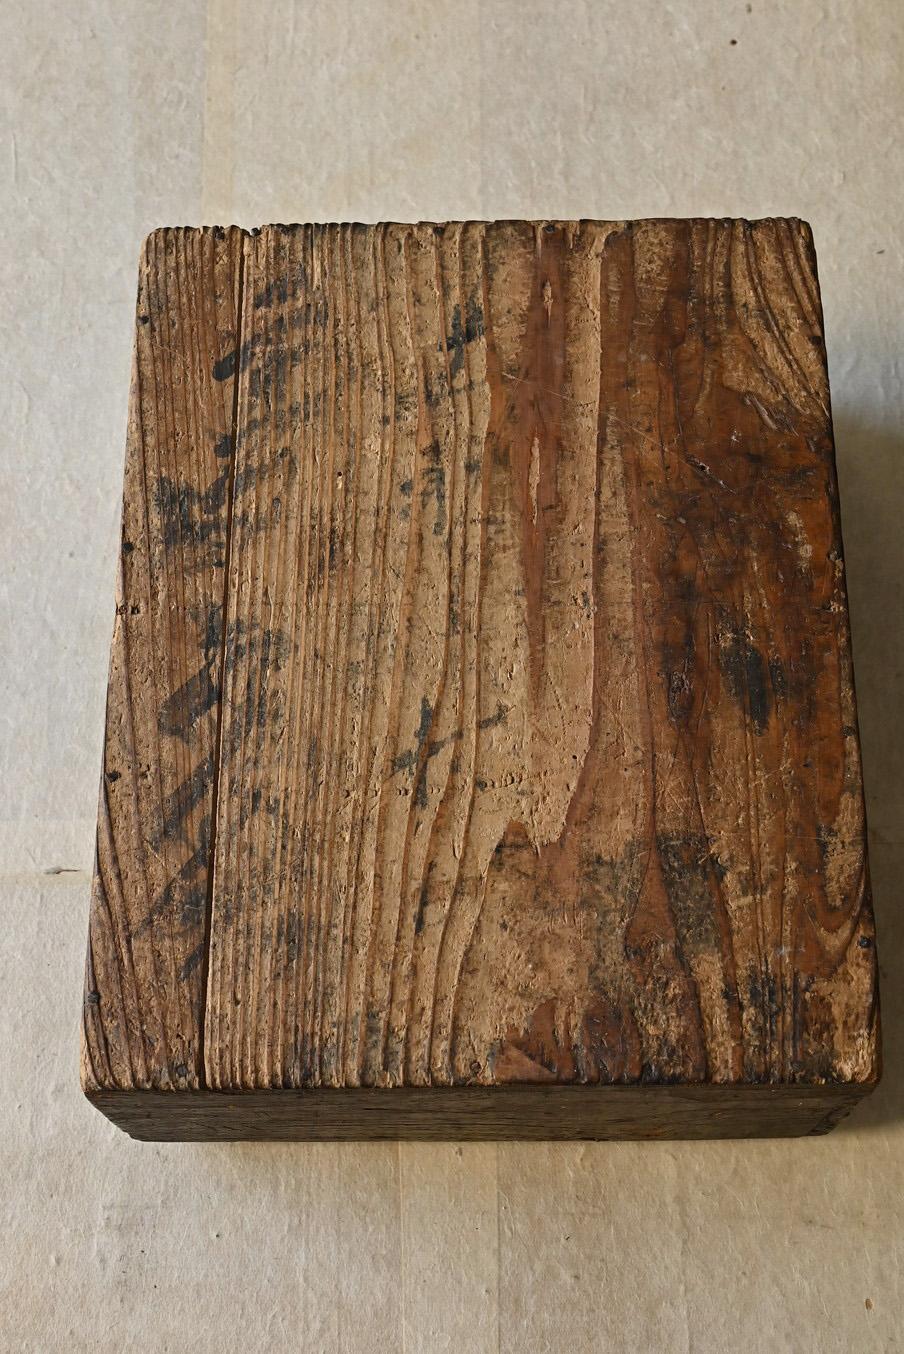 19th Century Japanese antique wabisabi wooden box/1800-1912/From the late Edo to the Meiji